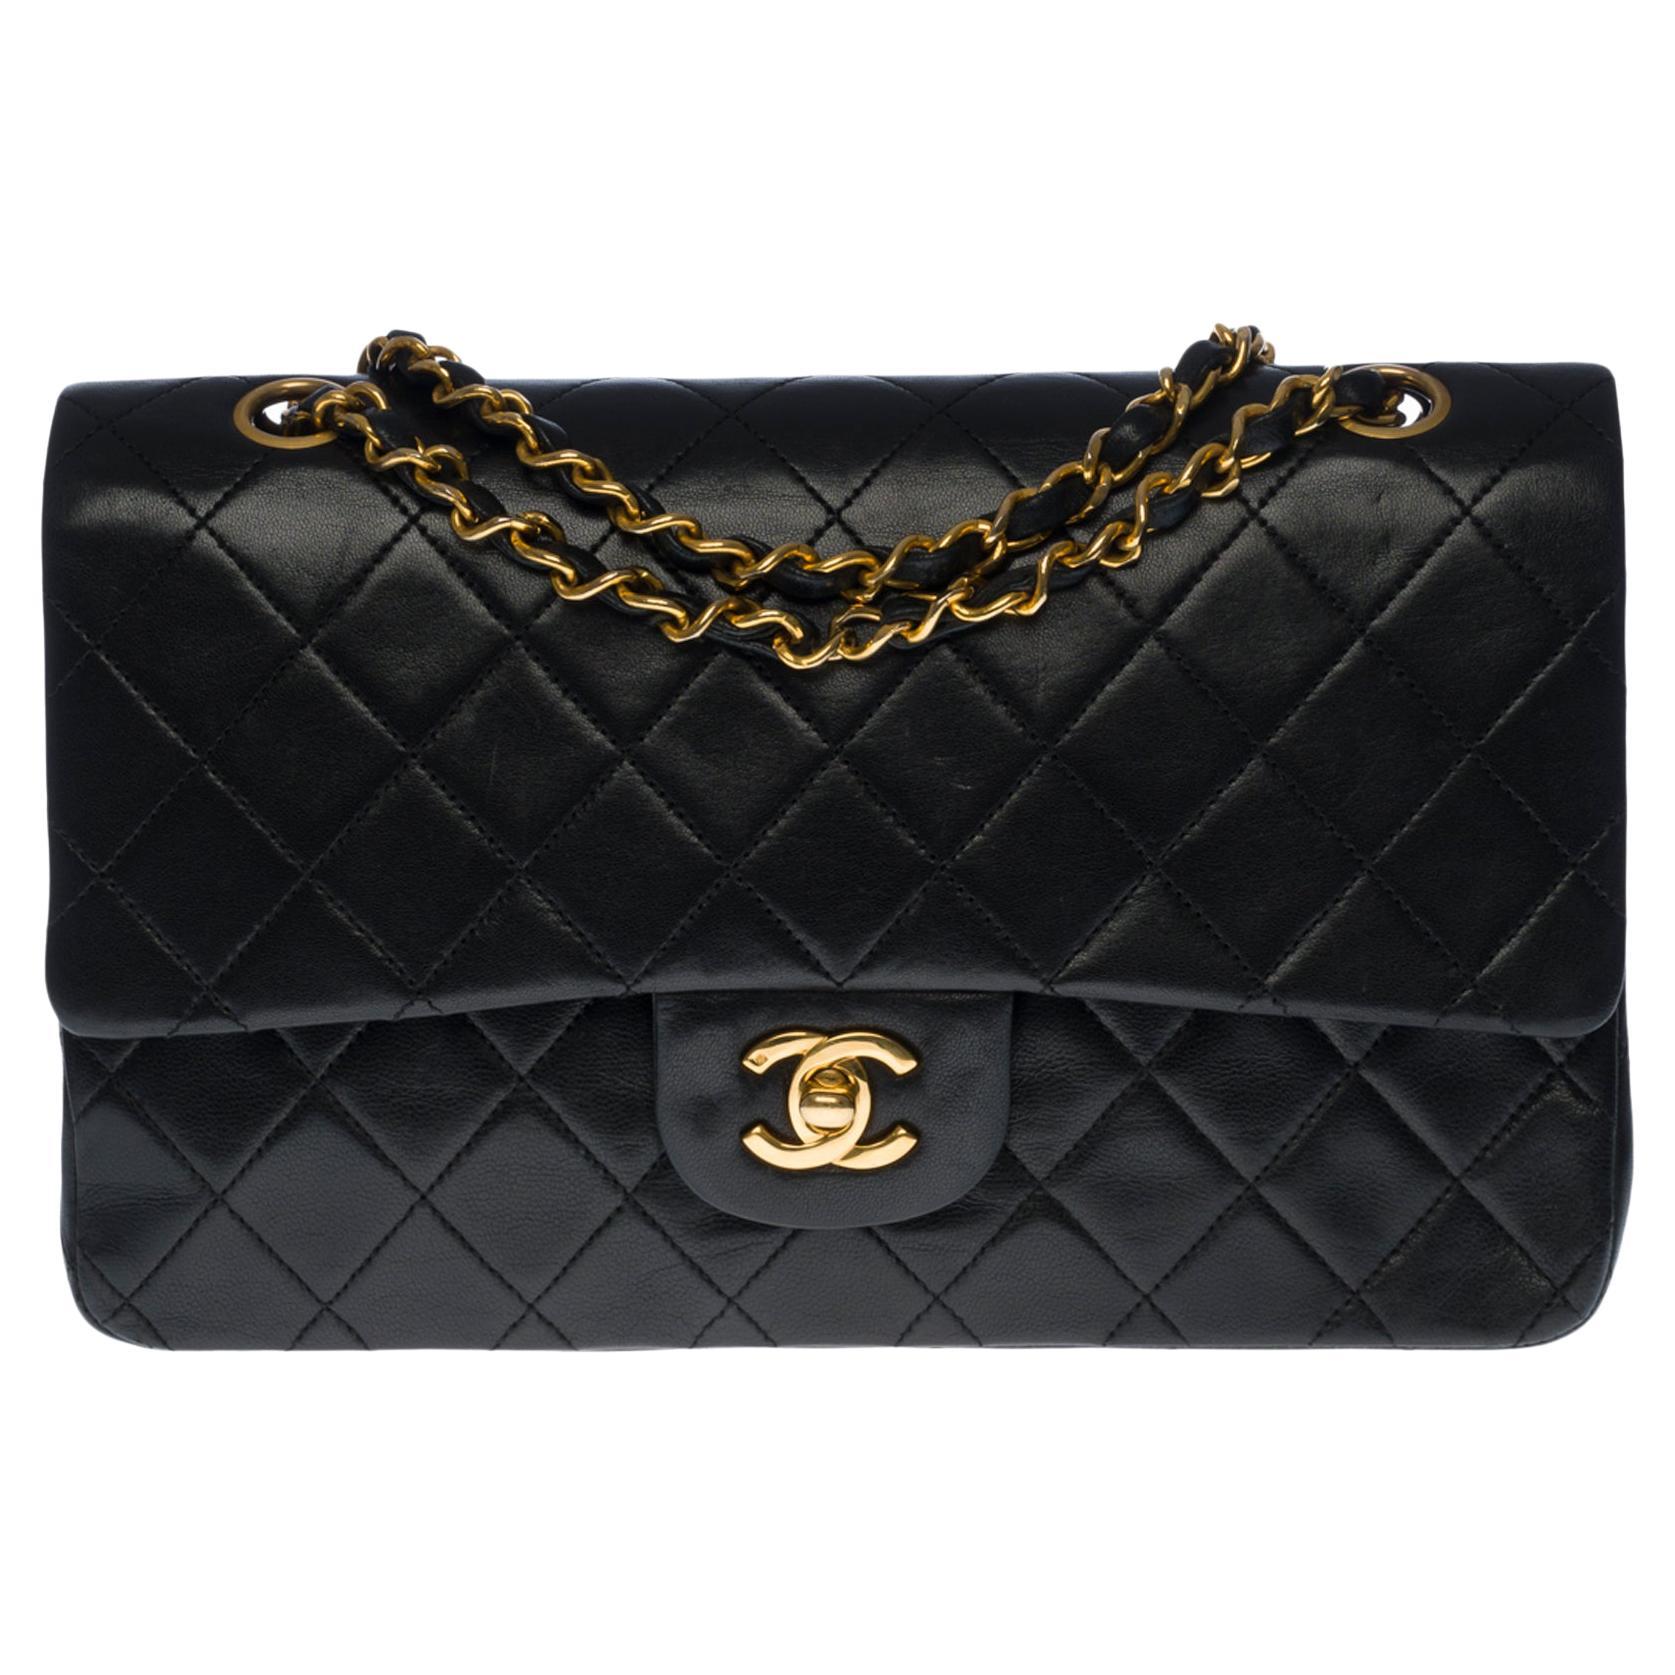 Chanel Timeless/Classic shoulder bag in black quilted lambskin and gold hardware